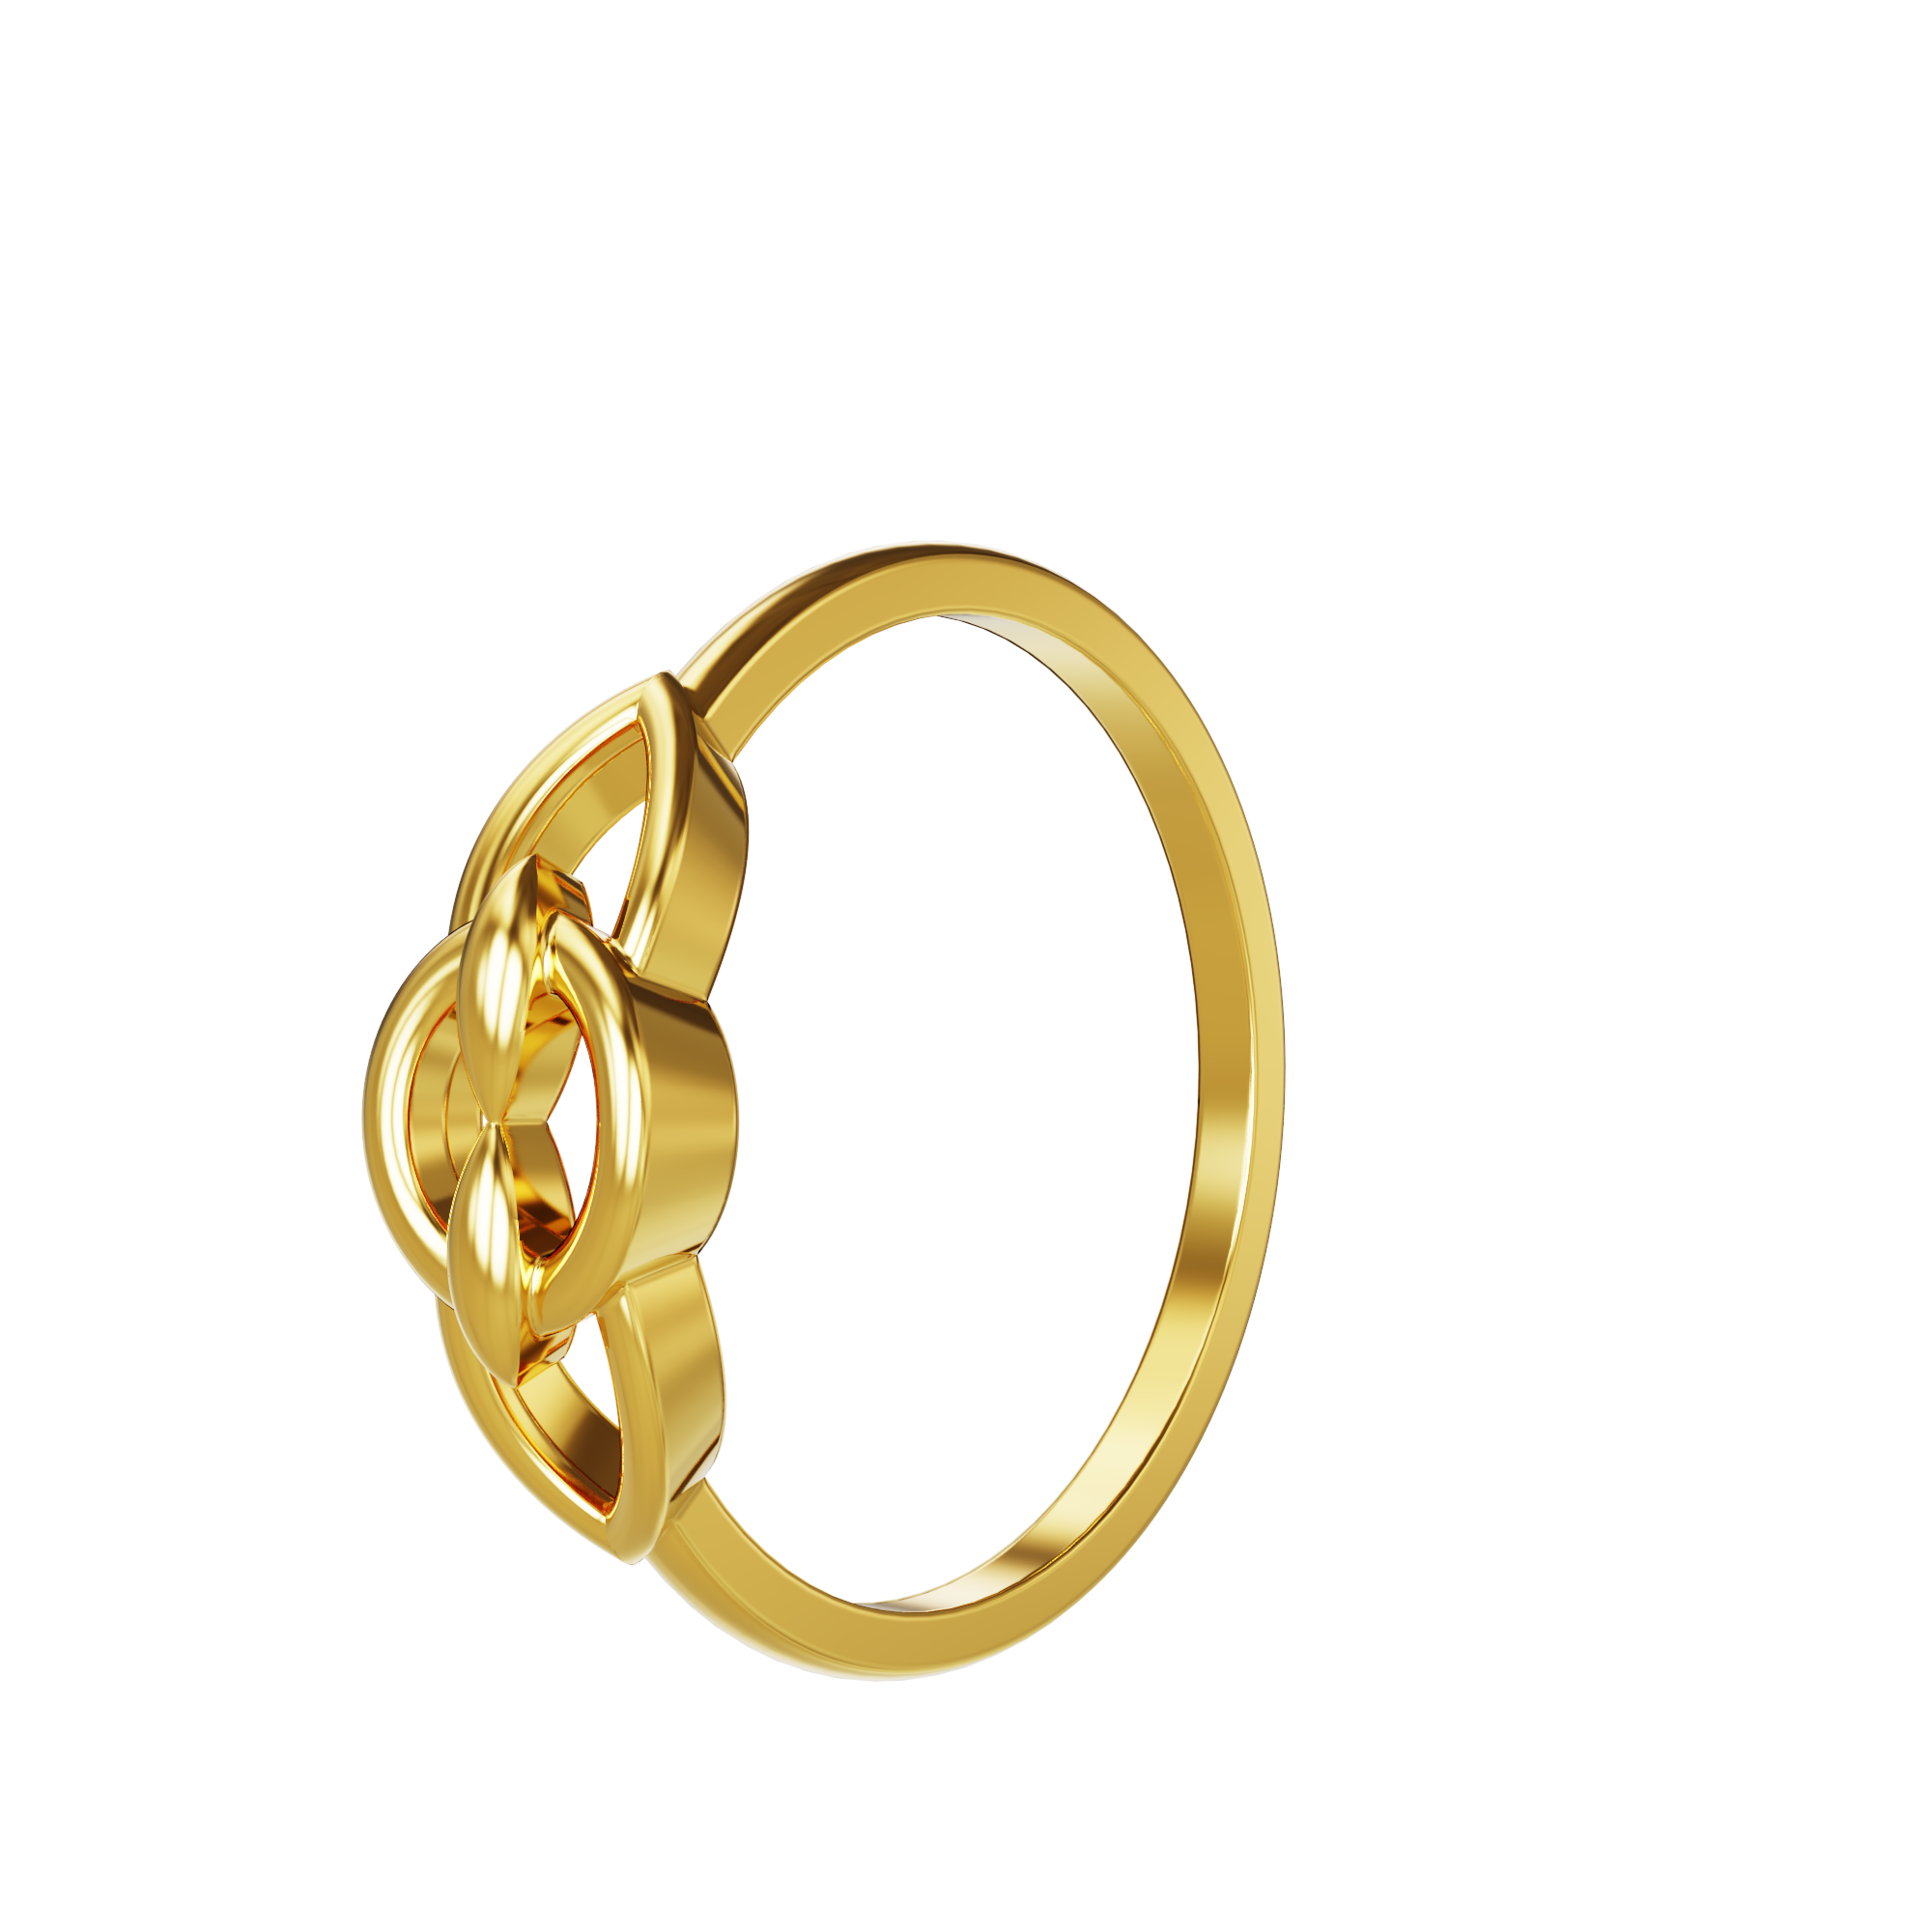 Mens Solid Gold Ring in Chennai - Dealers, Manufacturers & Suppliers  -Justdial